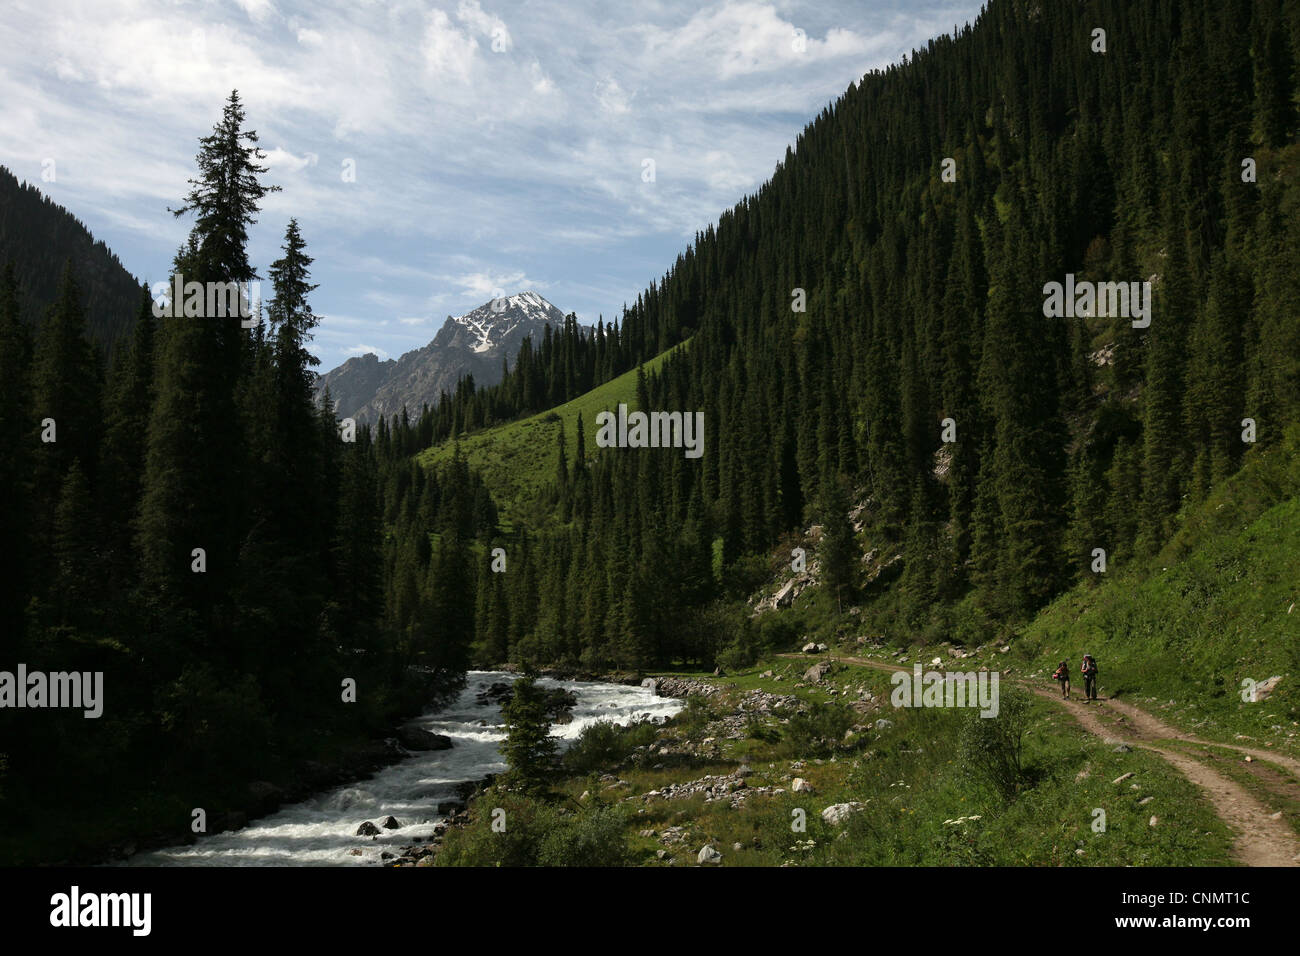 Tian Shan Spruces in the valley of the Karakol River in Terskey Ala-Too mountain range in Tian Shan, Kyrgyzstan. Stock Photo